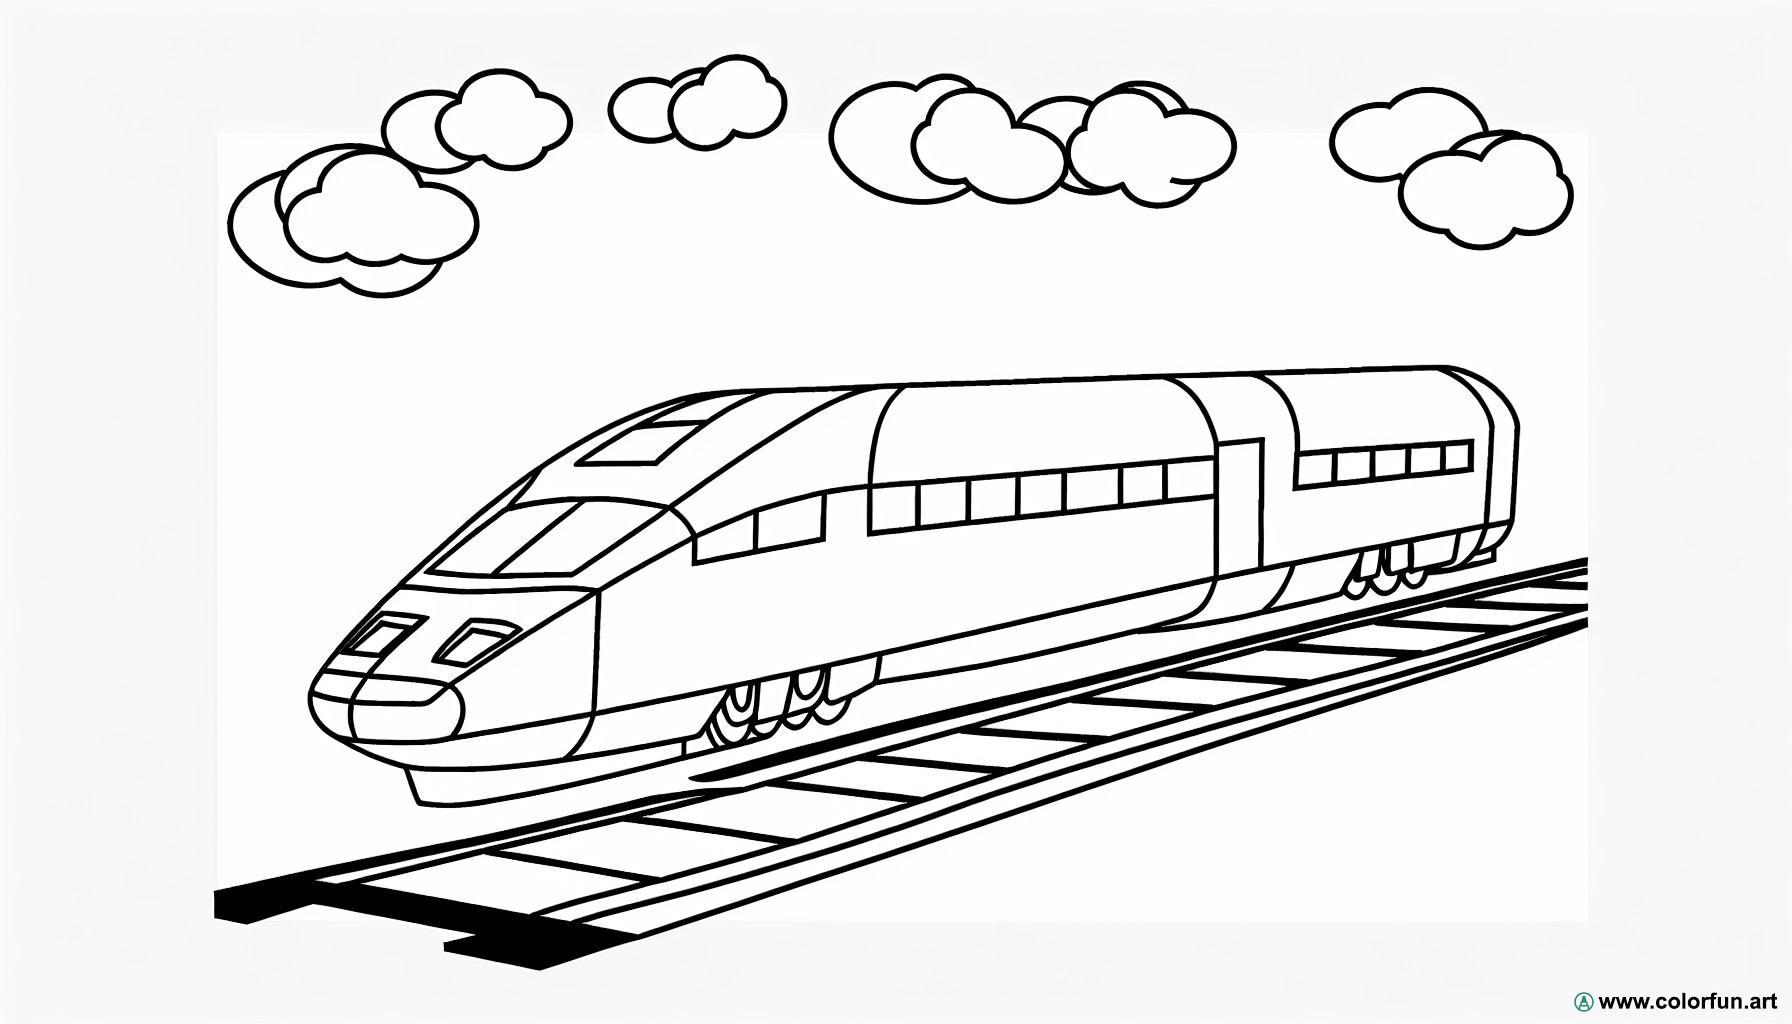 Spanish high-speed train coloring page